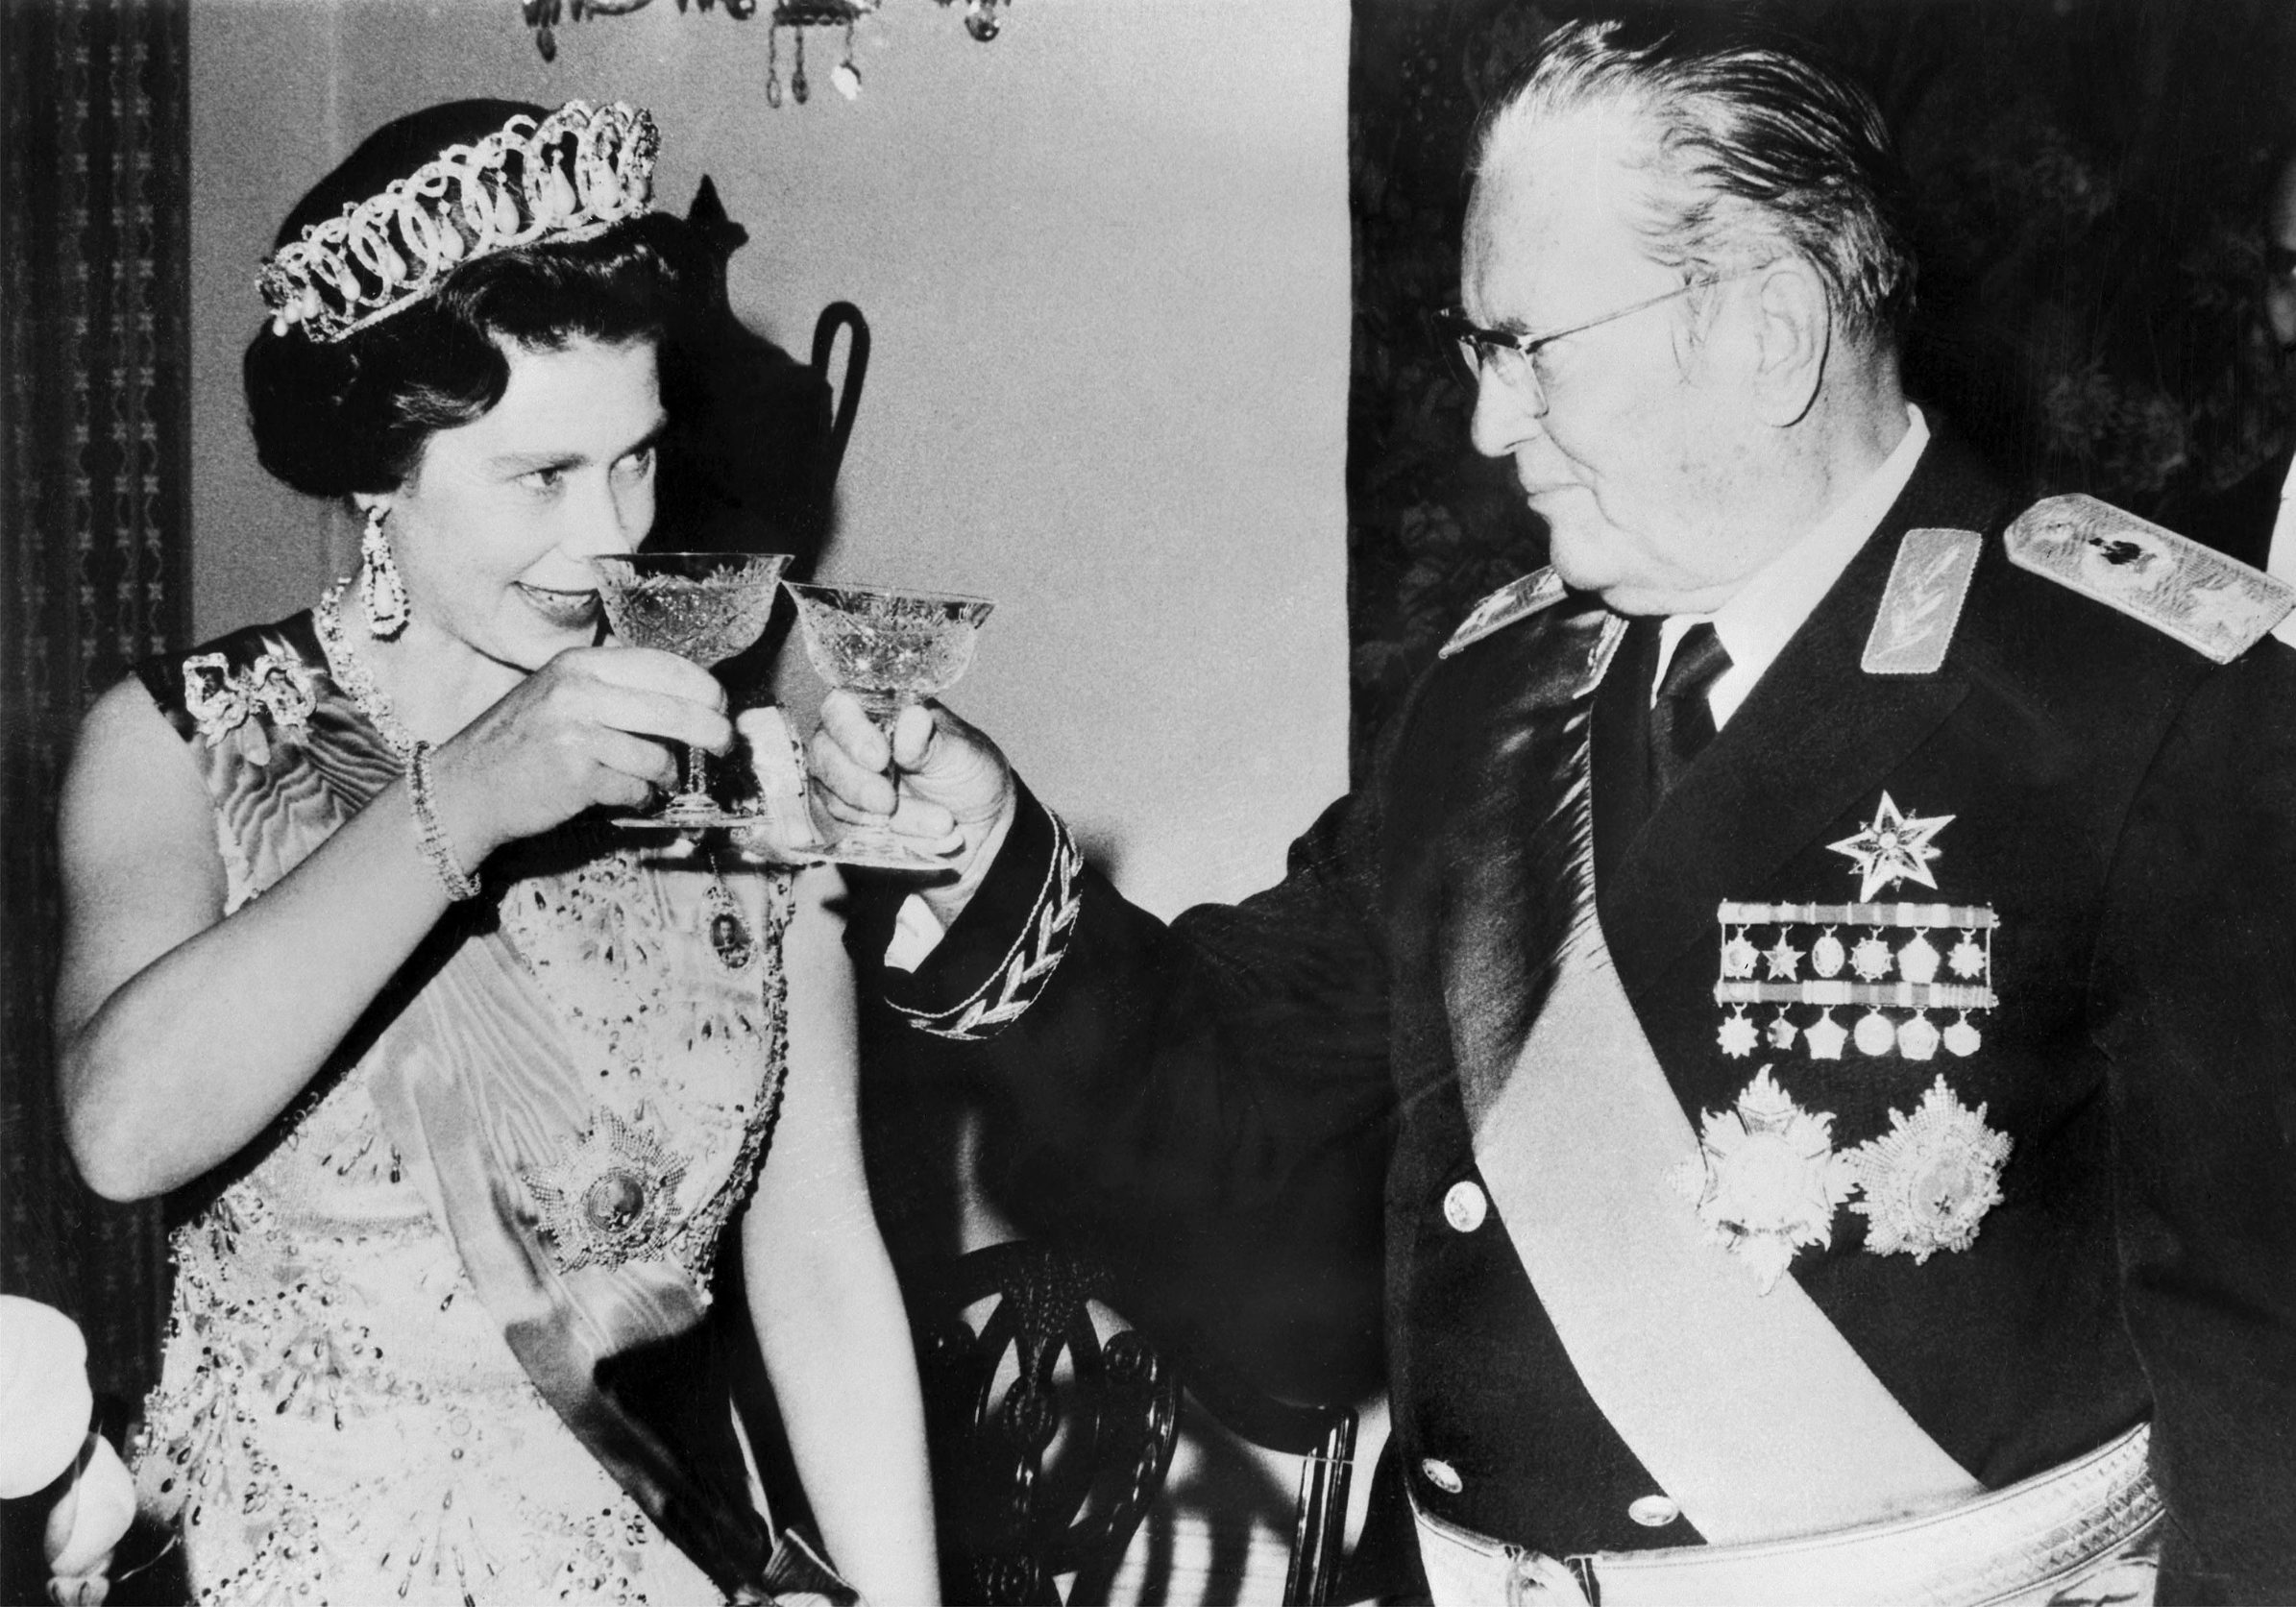 (FILES) In this file photo taken on October 21, 1972 The Queen Elizabeth II greets Marshall Josip Broz Tito during her official visit in Yougoslavia. - Josip Broz Tito, who died 40 years ago at the age of 88, was both revered and feared as the lifelong leader of former Yugoslavia, a country that later unravelled without his unifying presence. (Photo by - / AFP)